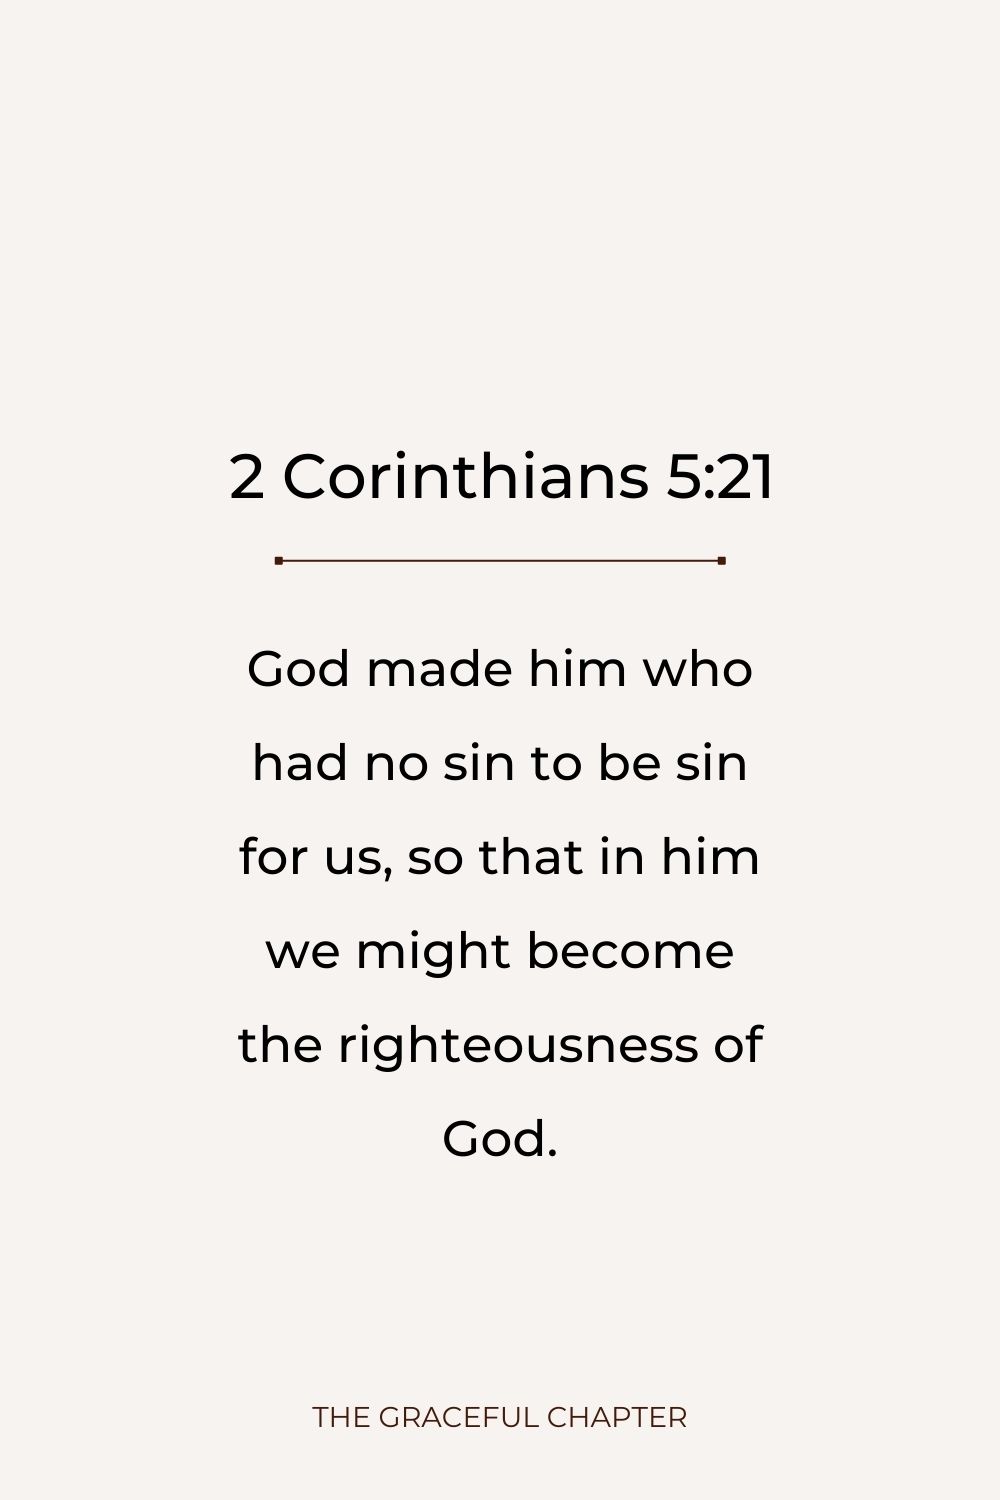 God made him who had no sin to be sin for us, so that in him we might become the righteousness of God.God made him who had no sin to be sin for us, so that in him we might become the righteousness of God. 2 Corinthians 5:21